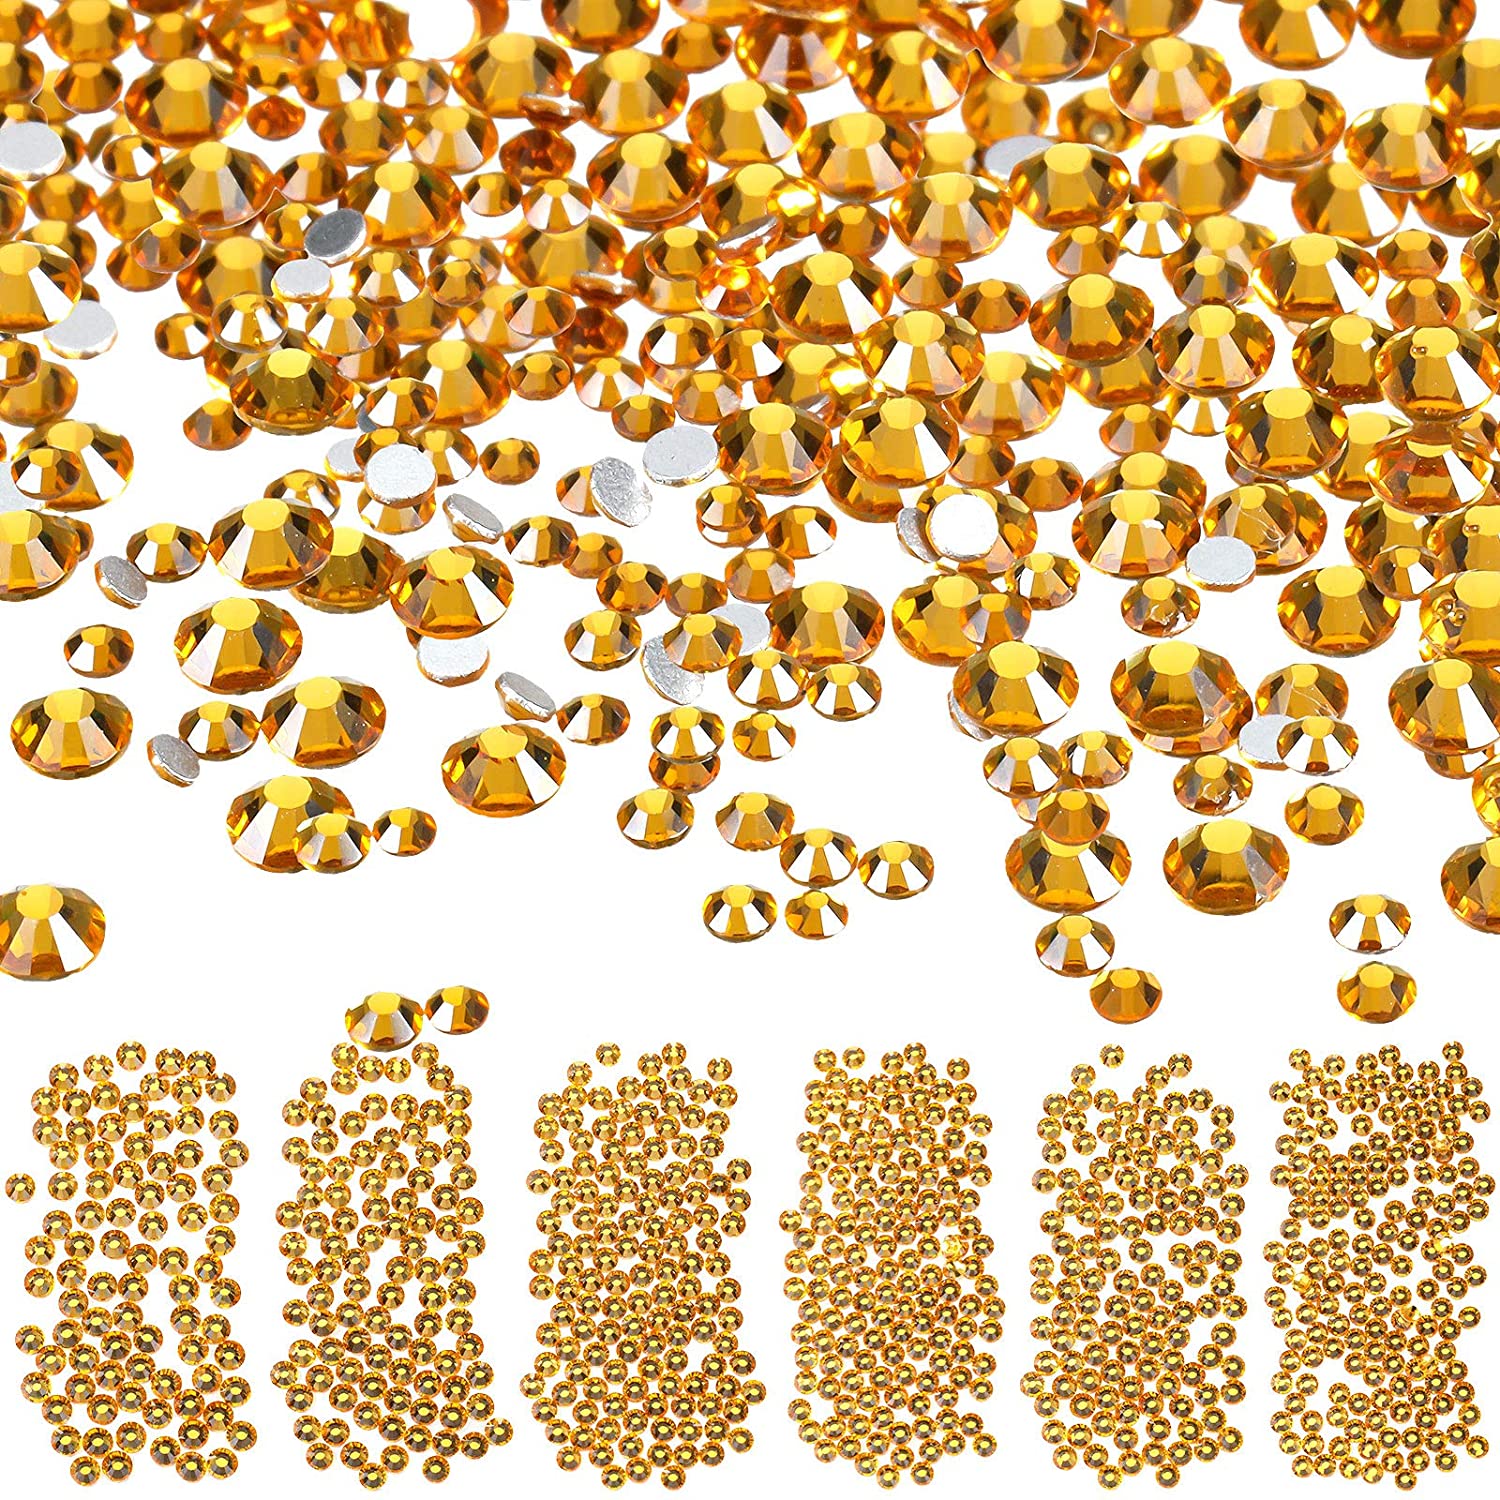 Bememo 3456 Pieces Nail Crystals AB Nail Art Rhinestones Round Beads Flatback Glass Charms Gems Stones, 6 Sizes for Nails Decoration Makeup Clothes Shoes (Iridescent)